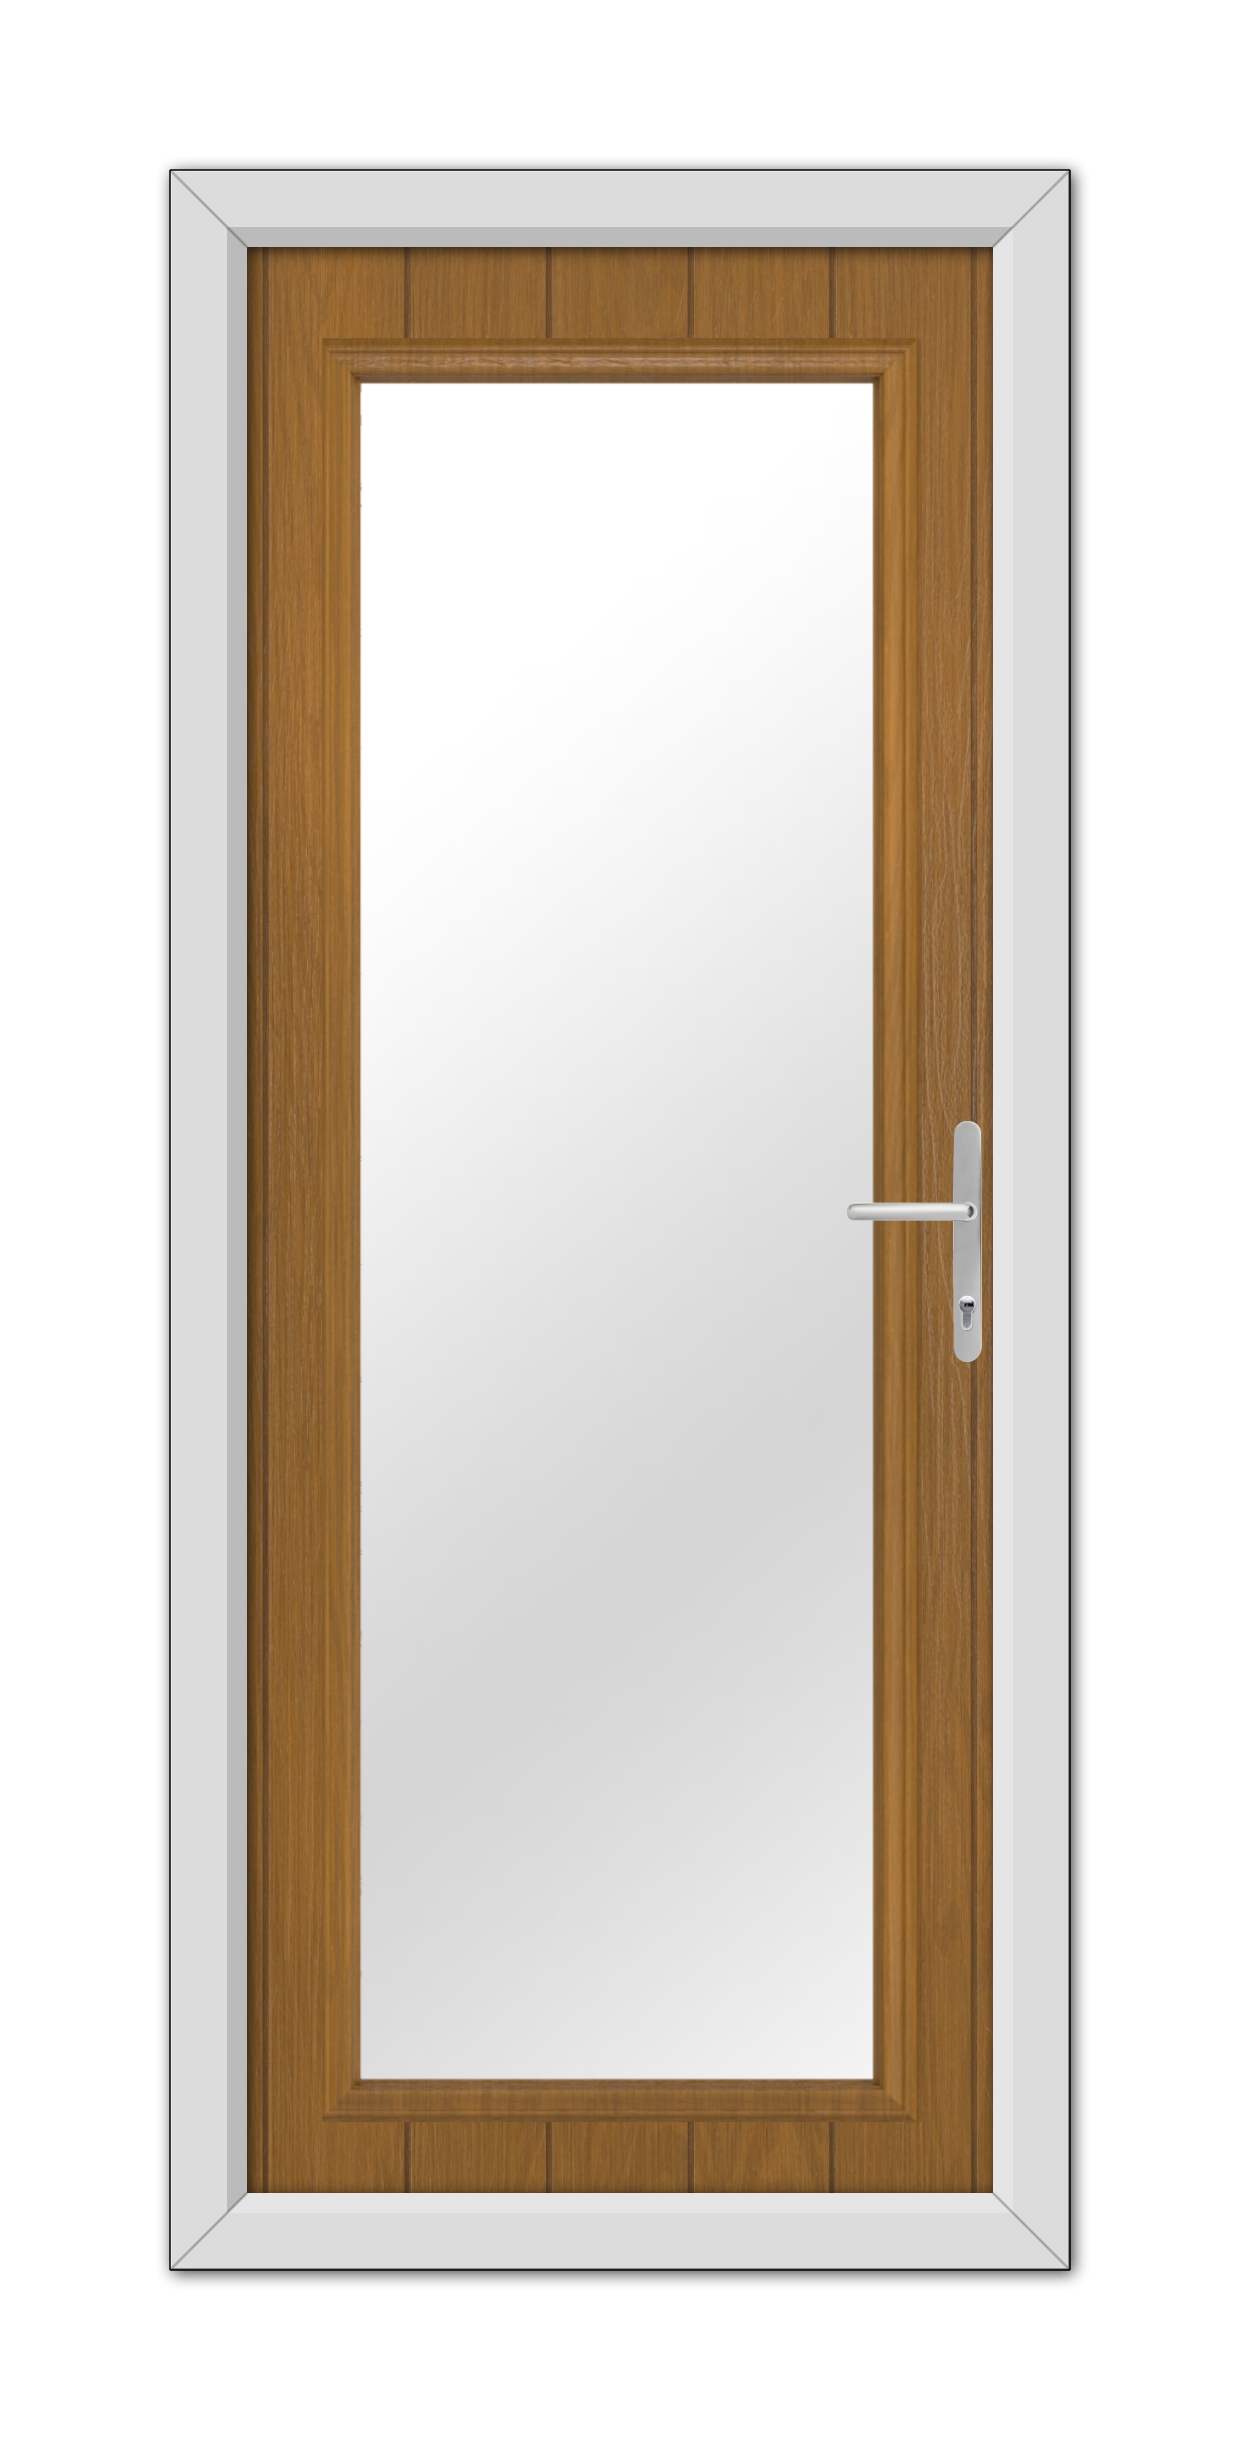 A closed Oak Hatton Composite Door with a vertical glass panel in the center, featuring a white frame and a metallic door handle on the right side.